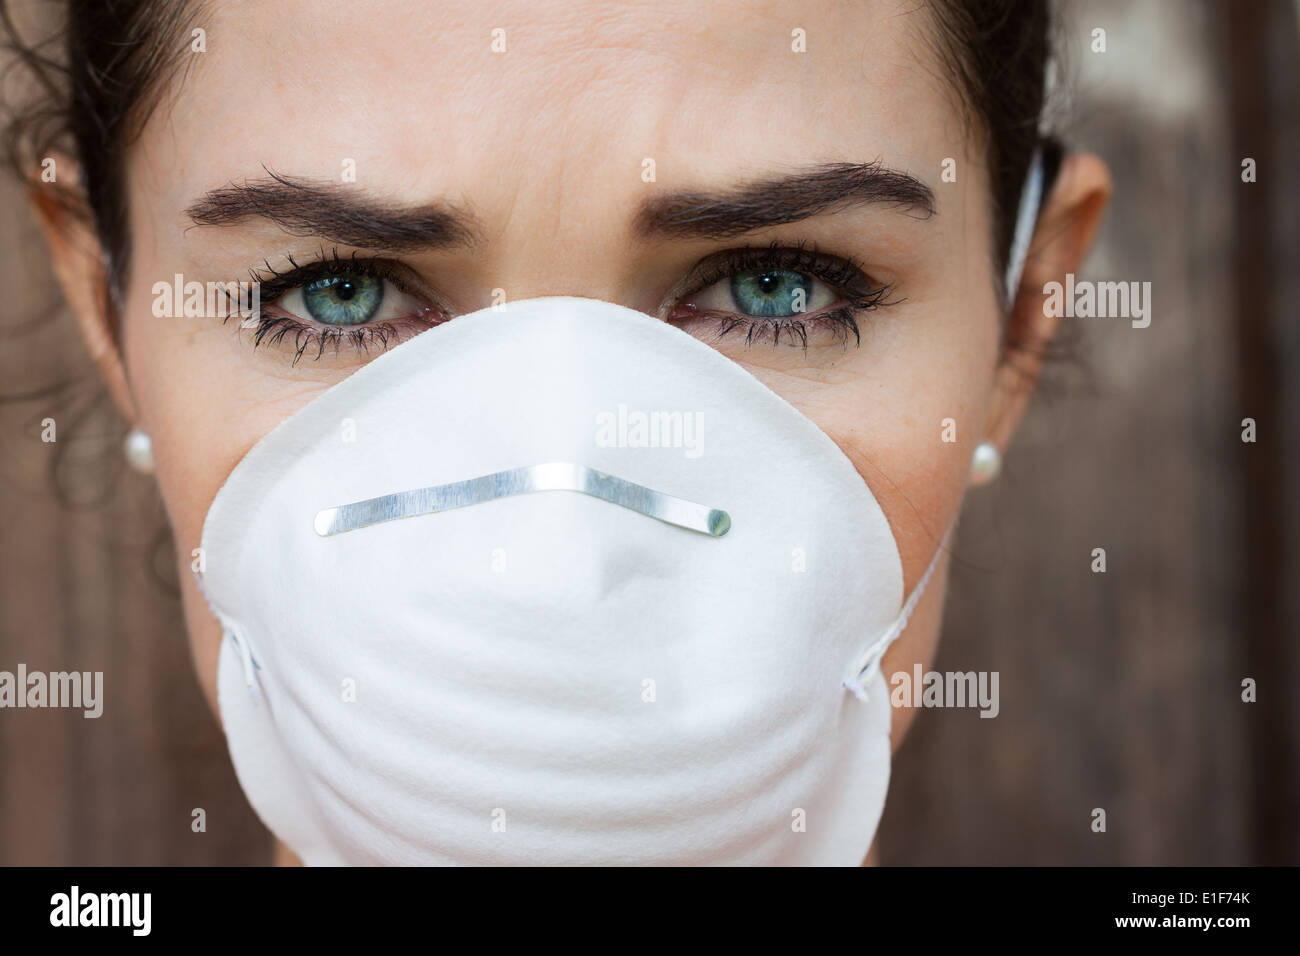 Close-up of an unhappy woman wearing a face mask to deal with virus or pollution. Stock Photo